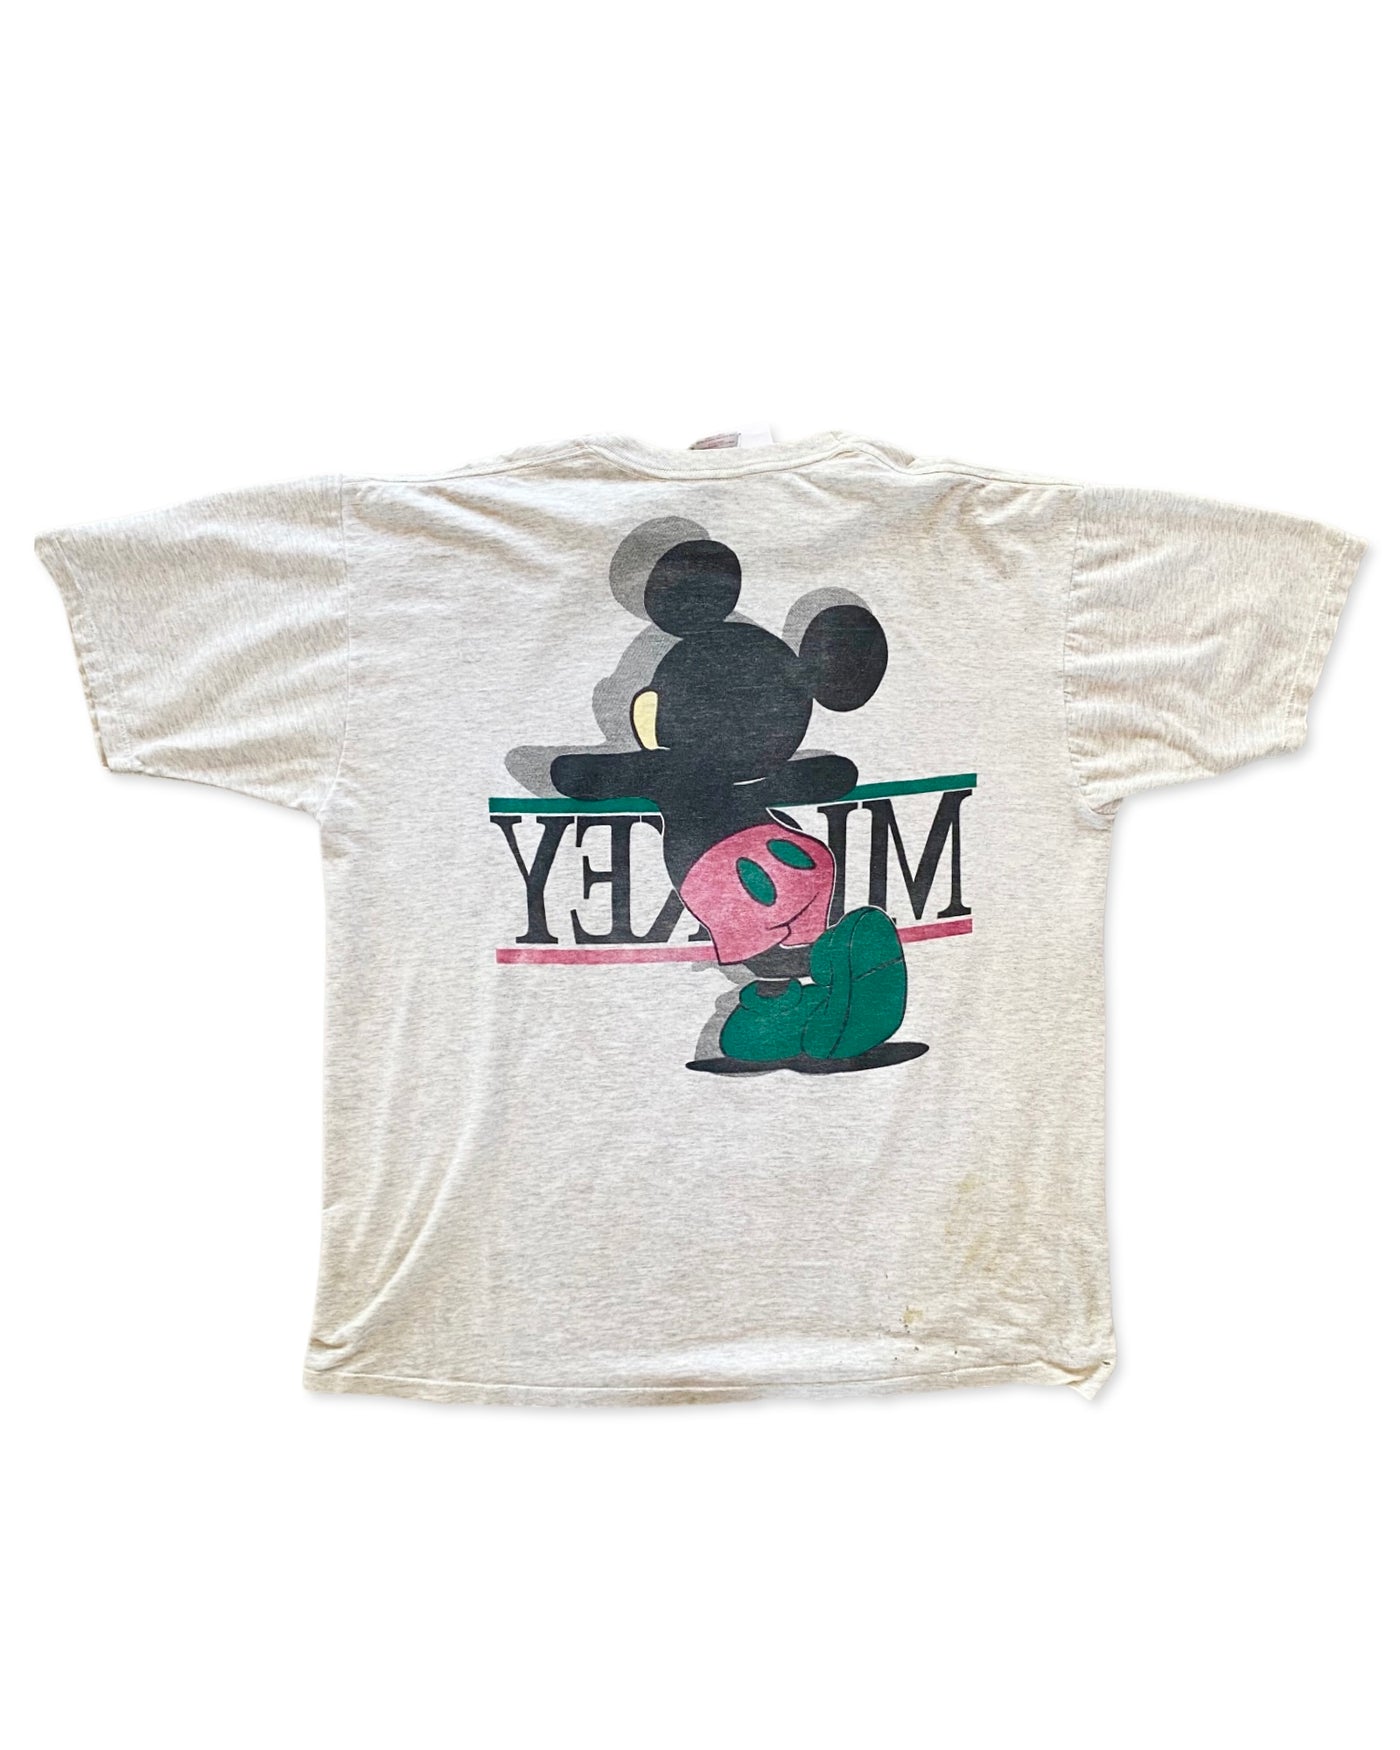 Vintage Double Sided Mickey Mouse Graphic T-Shirt